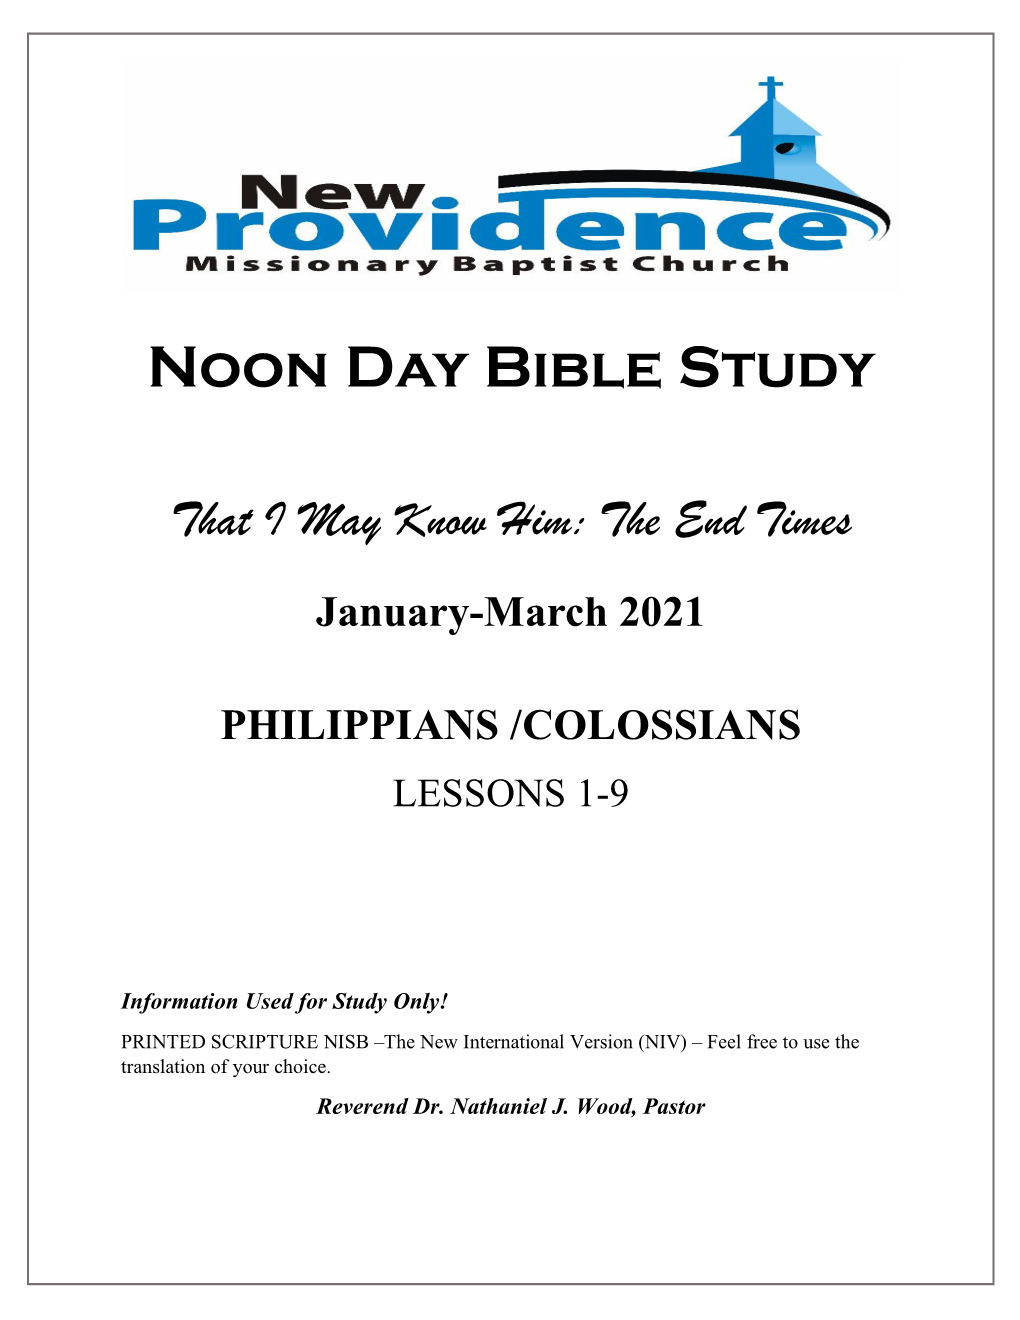 Noon Day Bible Study